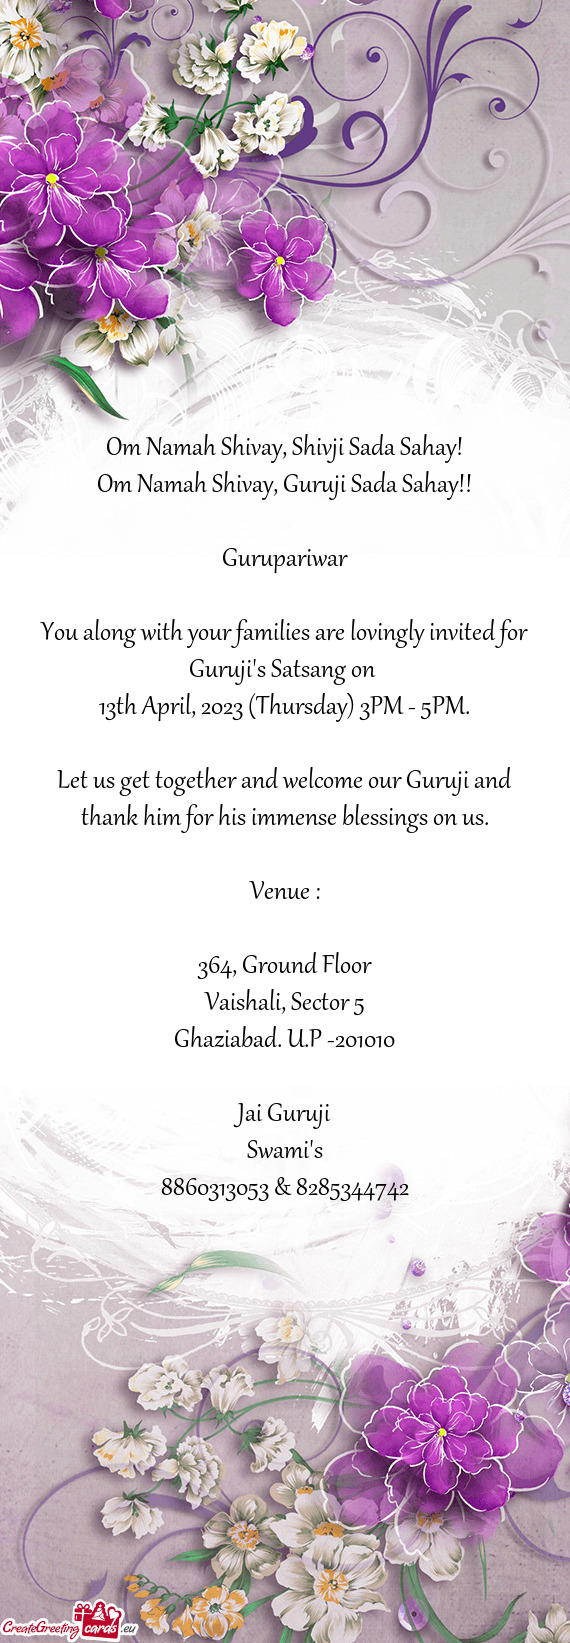 You along with your families are lovingly invited for Guruji